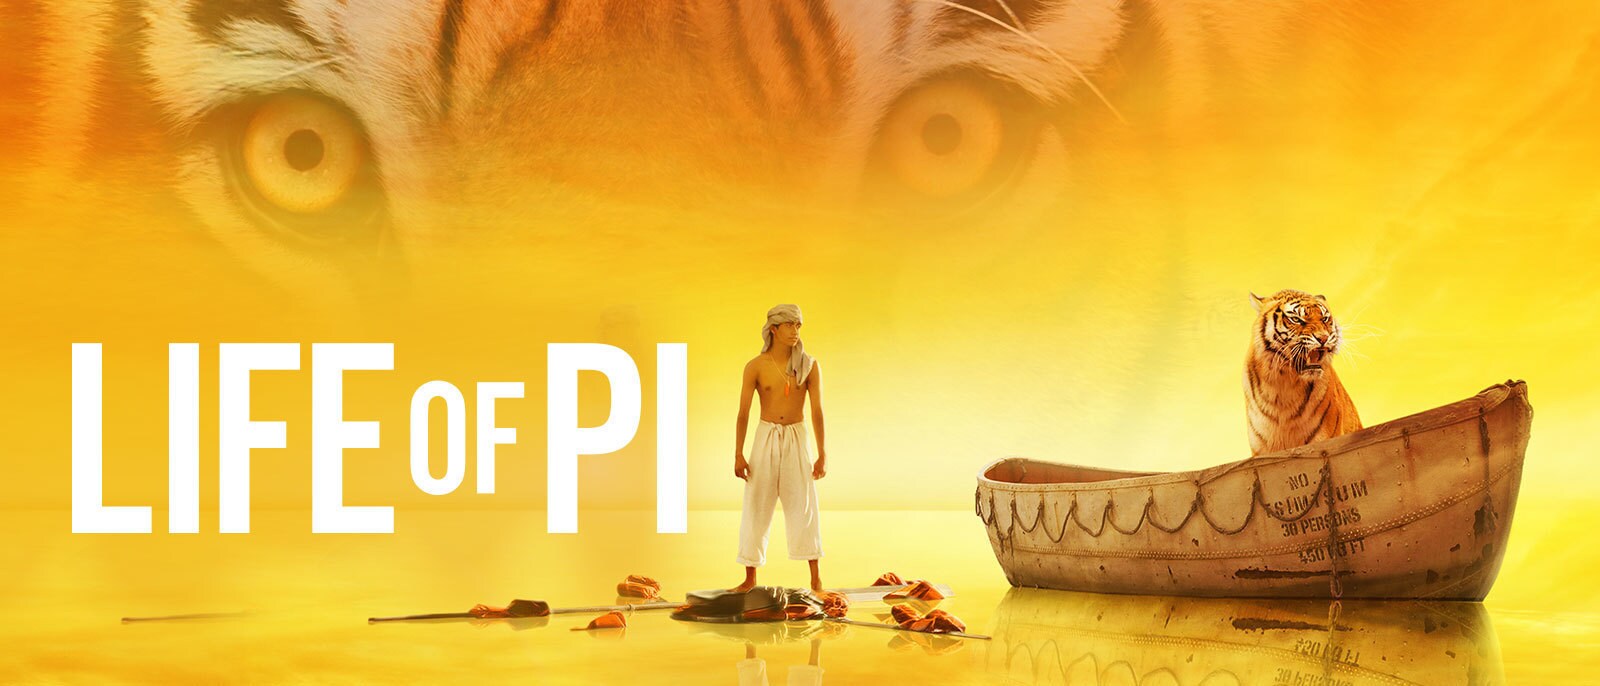 life of pi movie release date usa